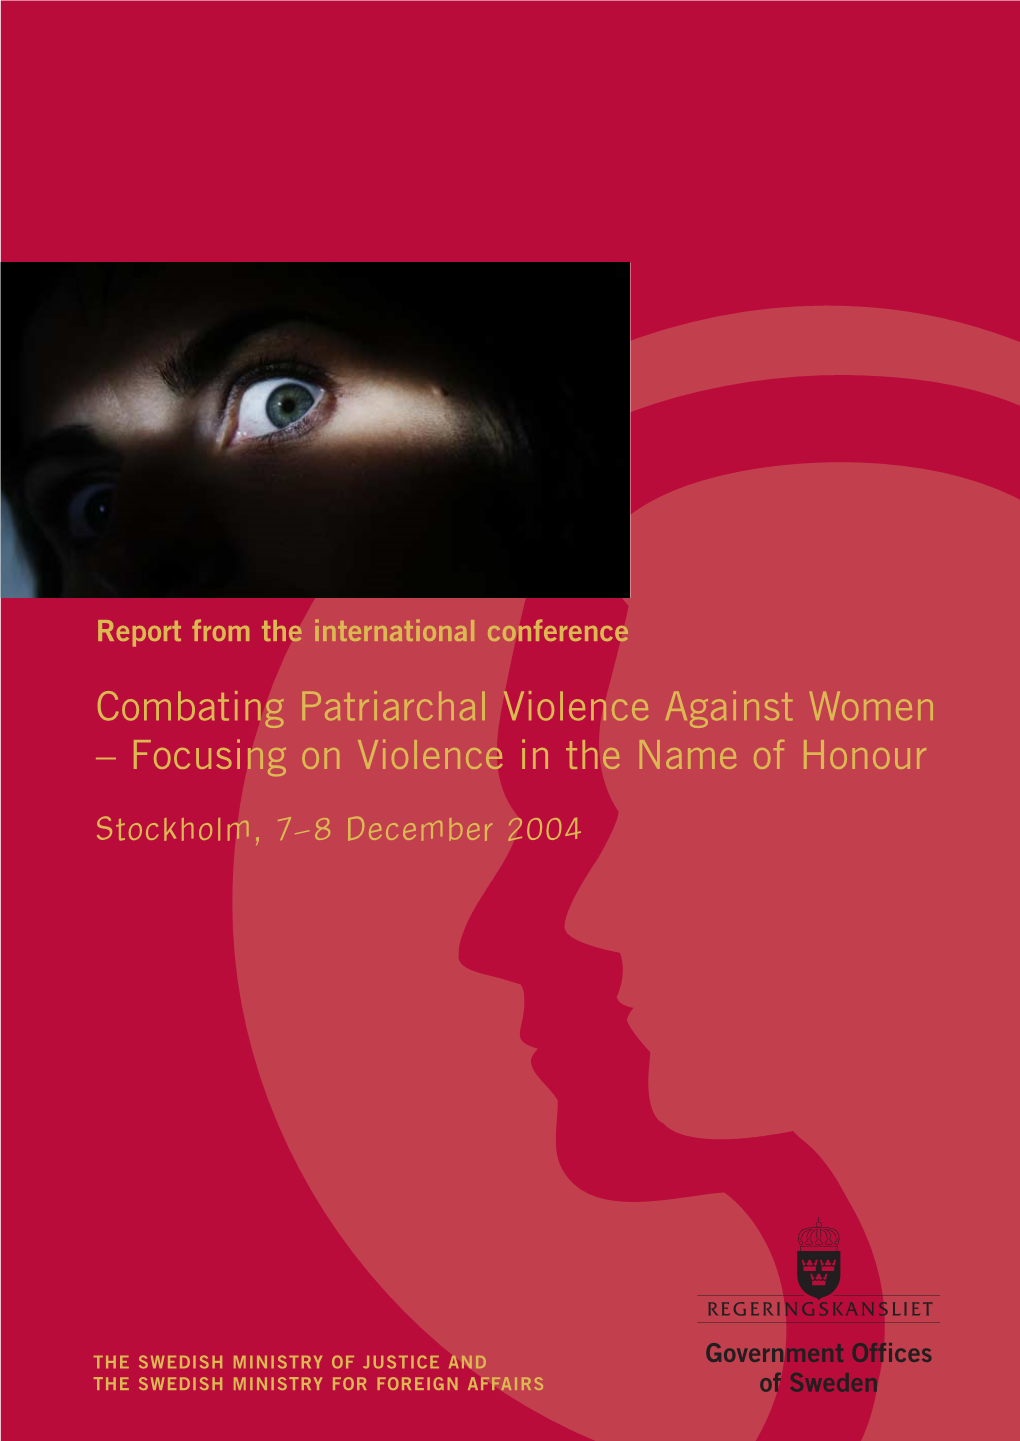 Combating Patriarchal Violence Against Women – Focusing on Violence in the Name of Honour